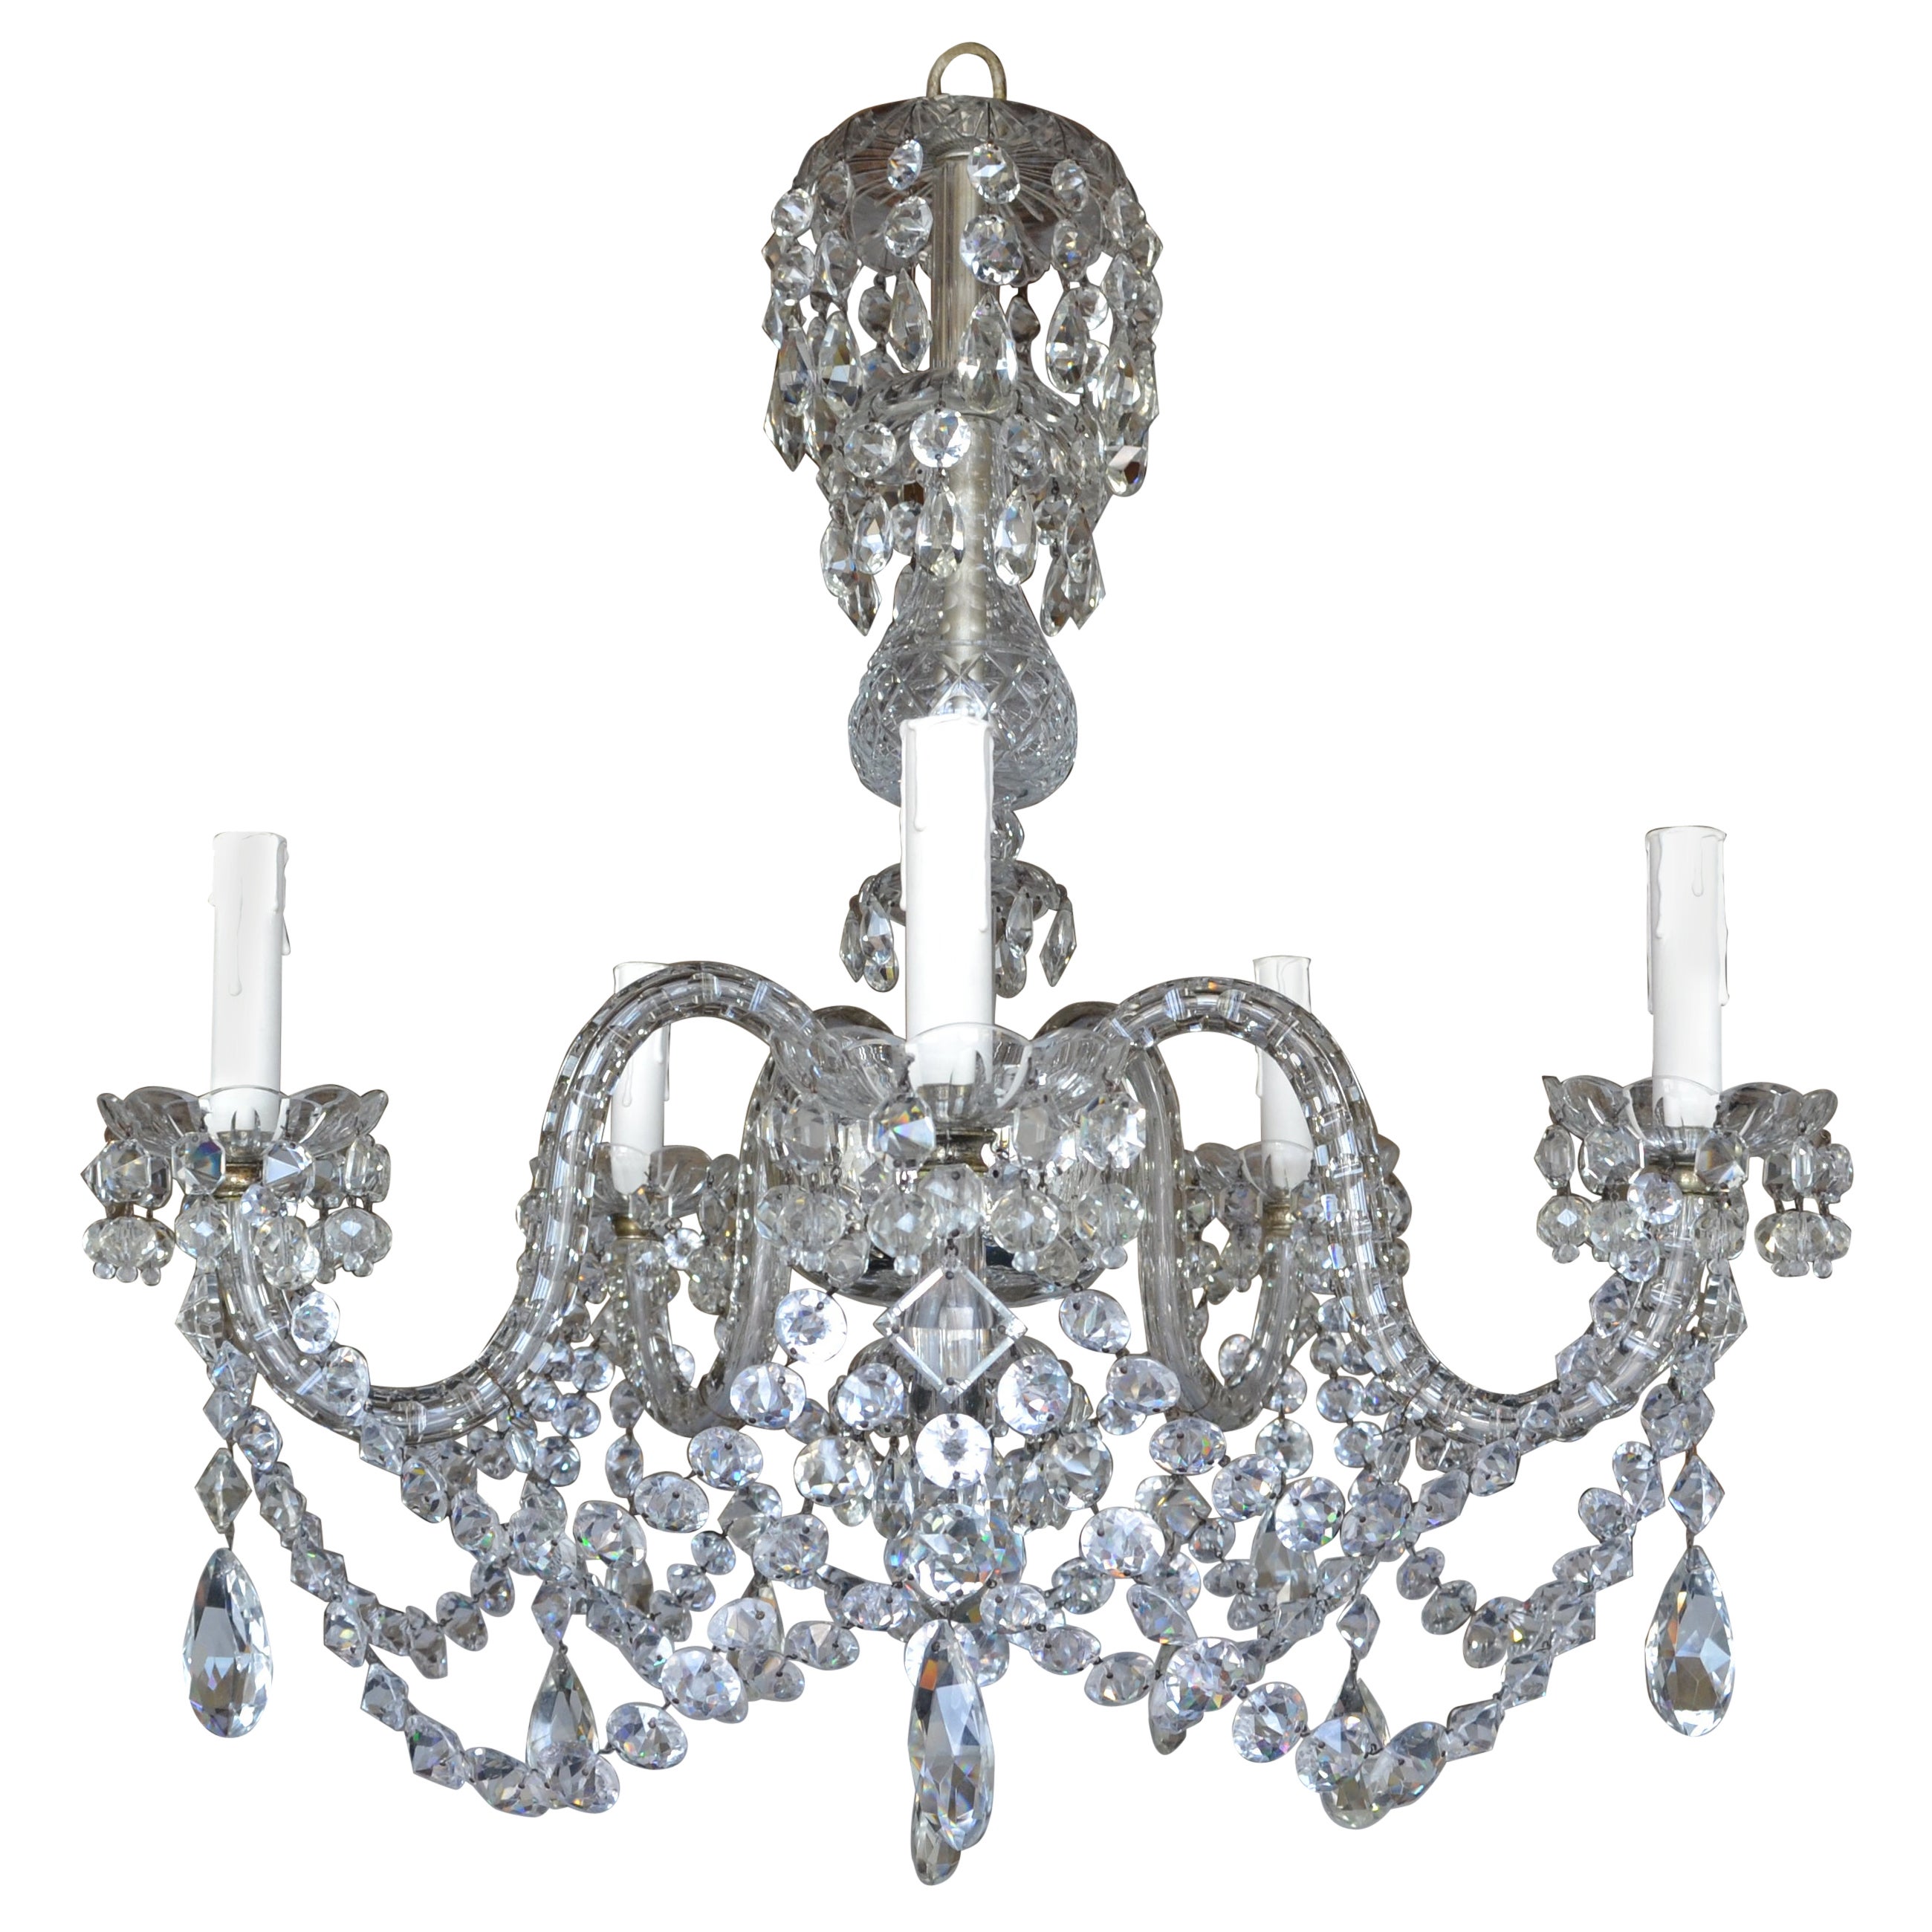 19th Century Pair of Old English Crystal 5 light chandeliers